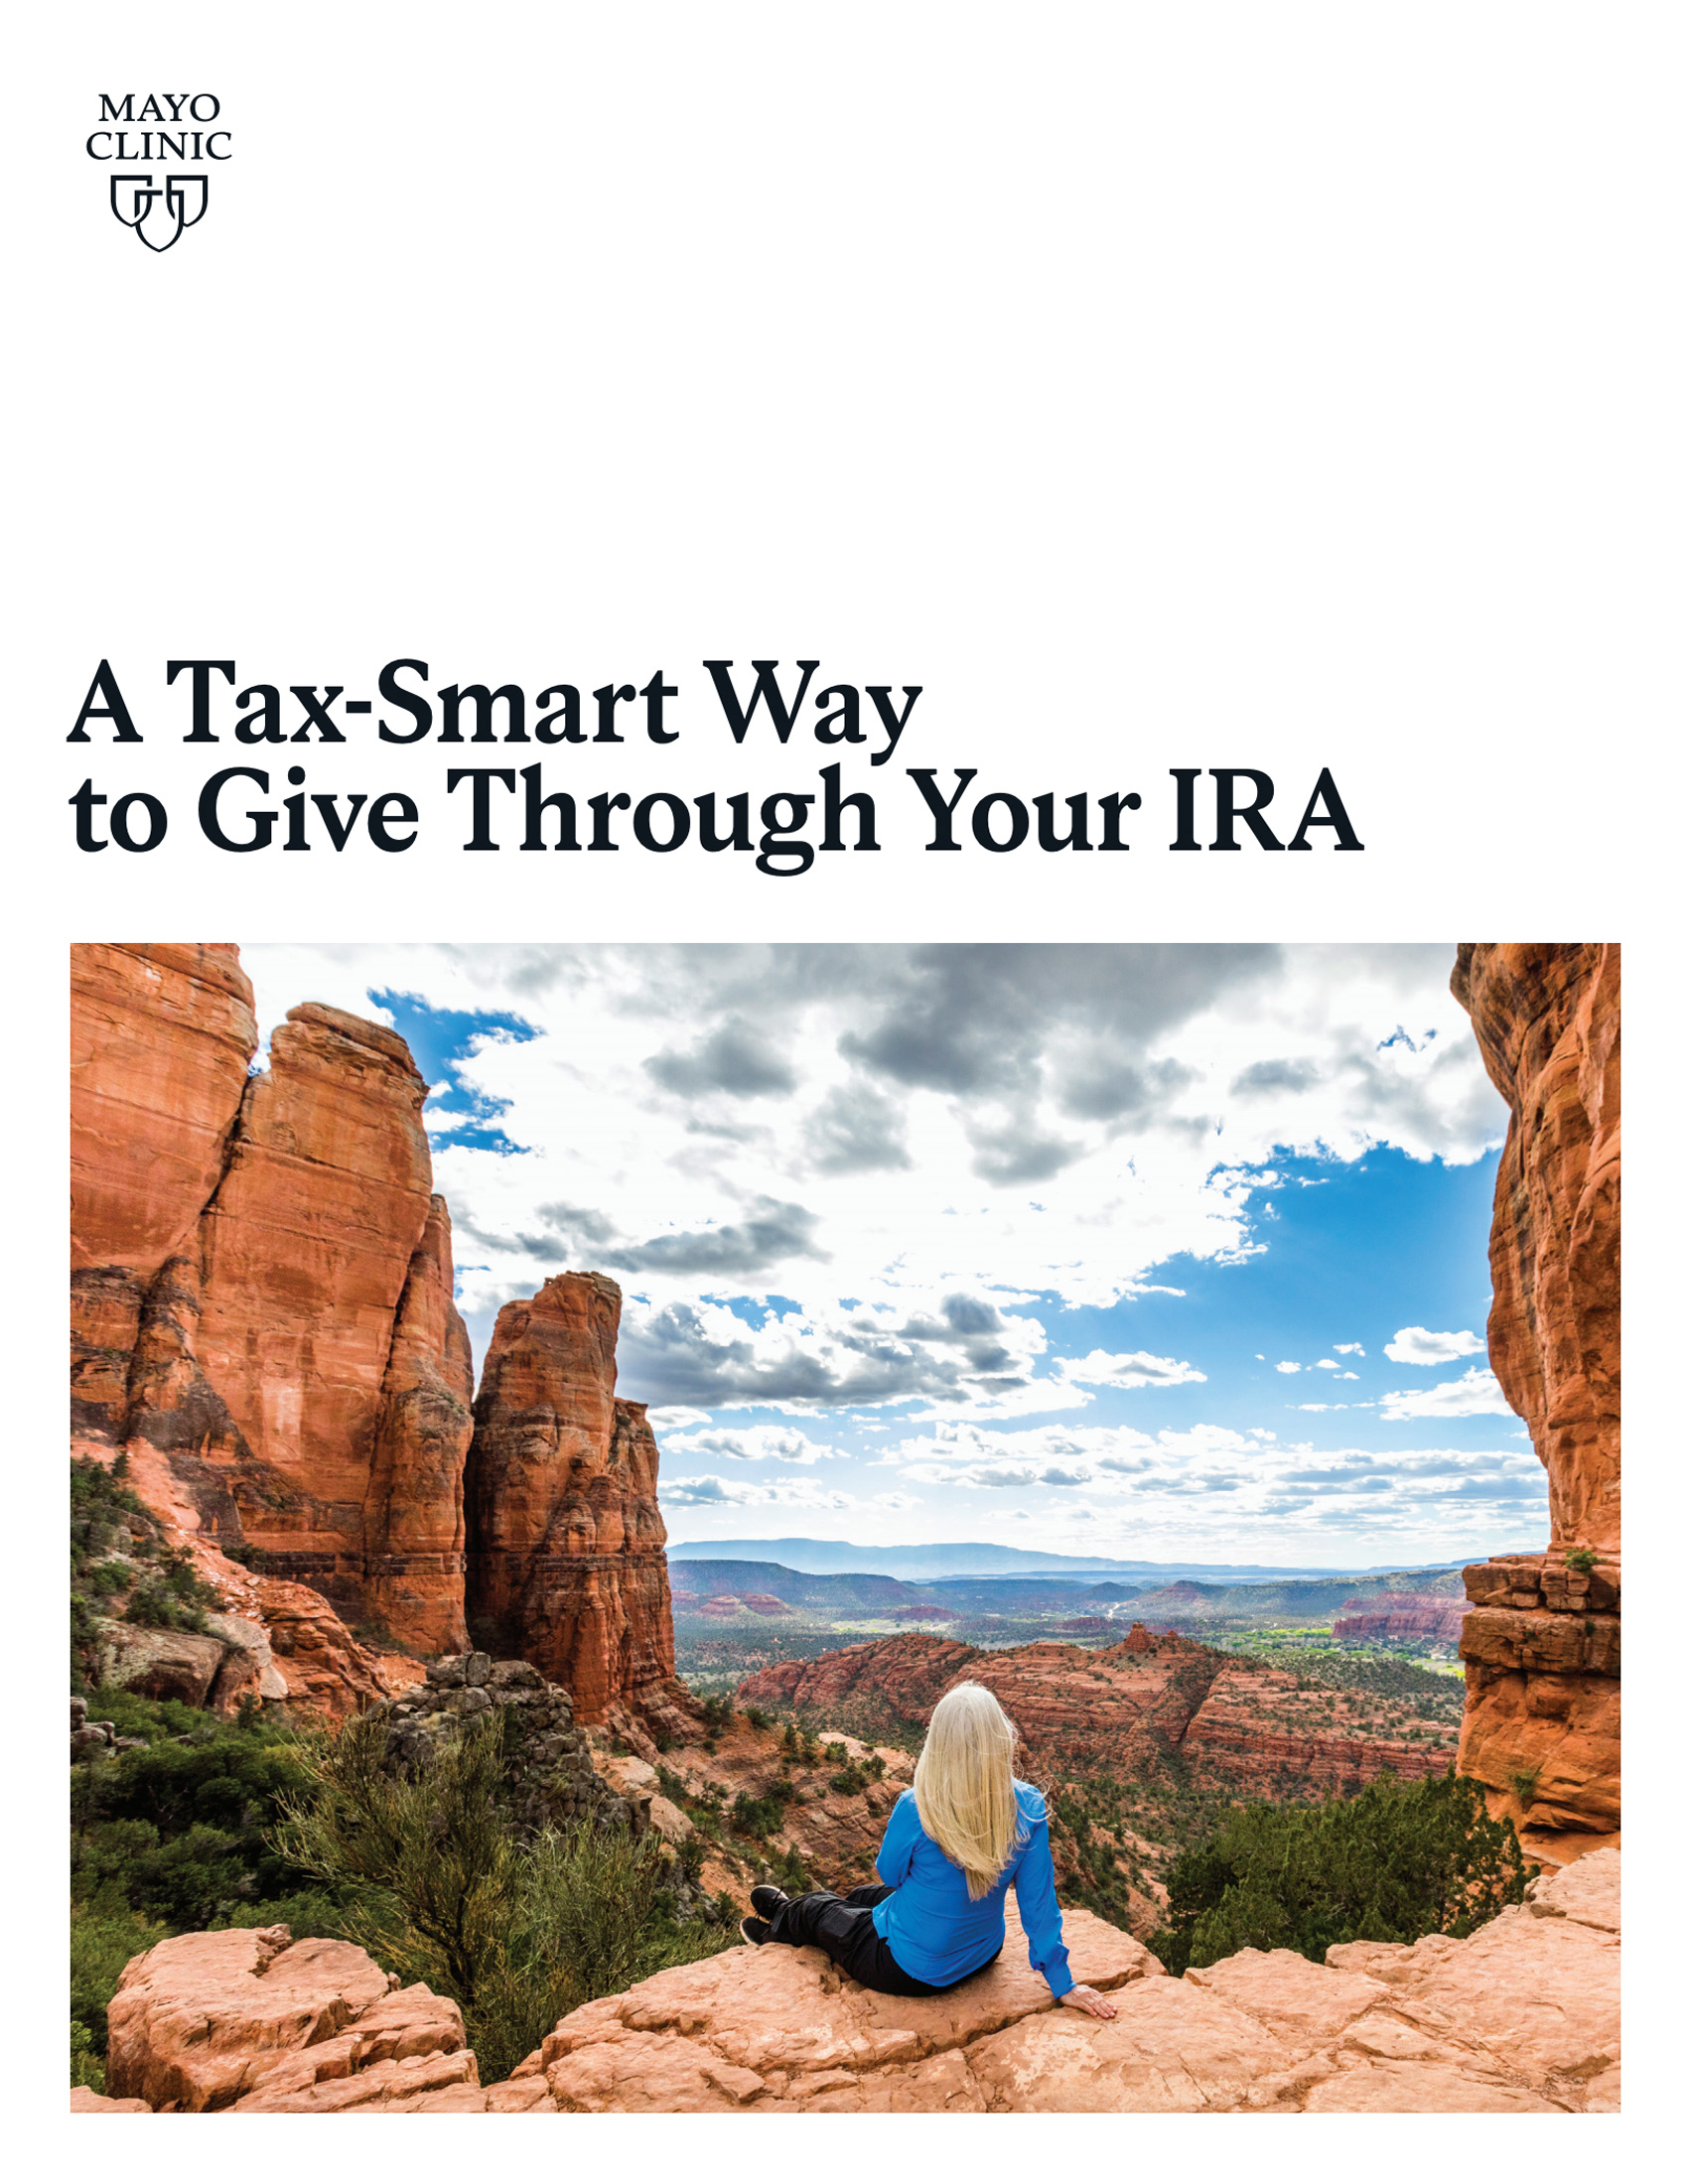 A Tax-Smart Way to Give Through Your IRA